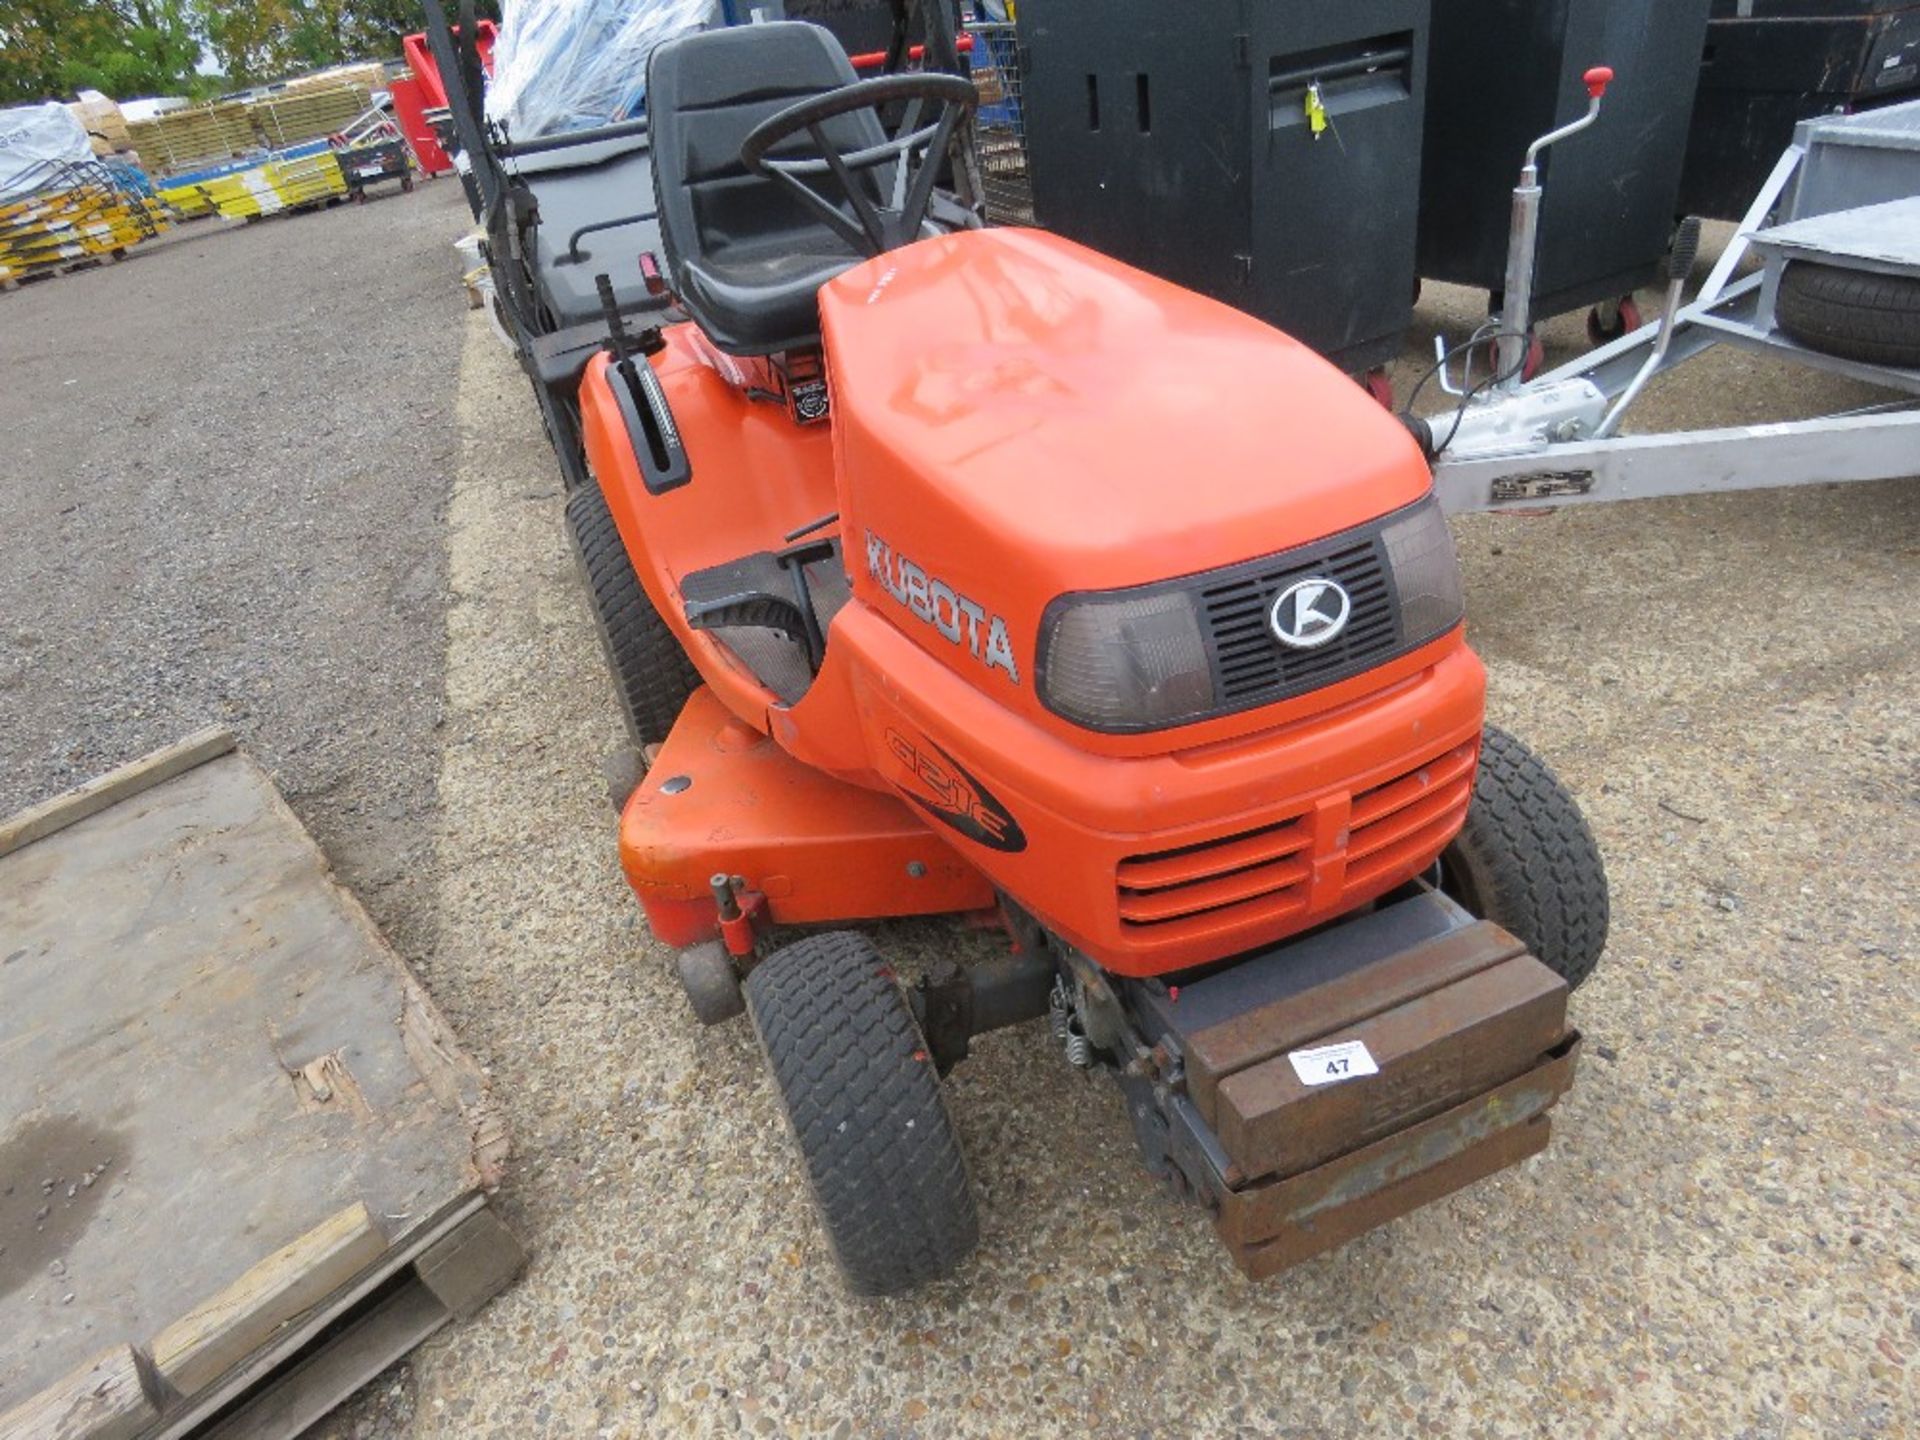 KUBOTA G21E RIDE ON MOWER WITH HIGH DISCHARGE COLLECTOR, YEAR 2014. WHEN TESTED WAS SEEN TO RUN, DRI